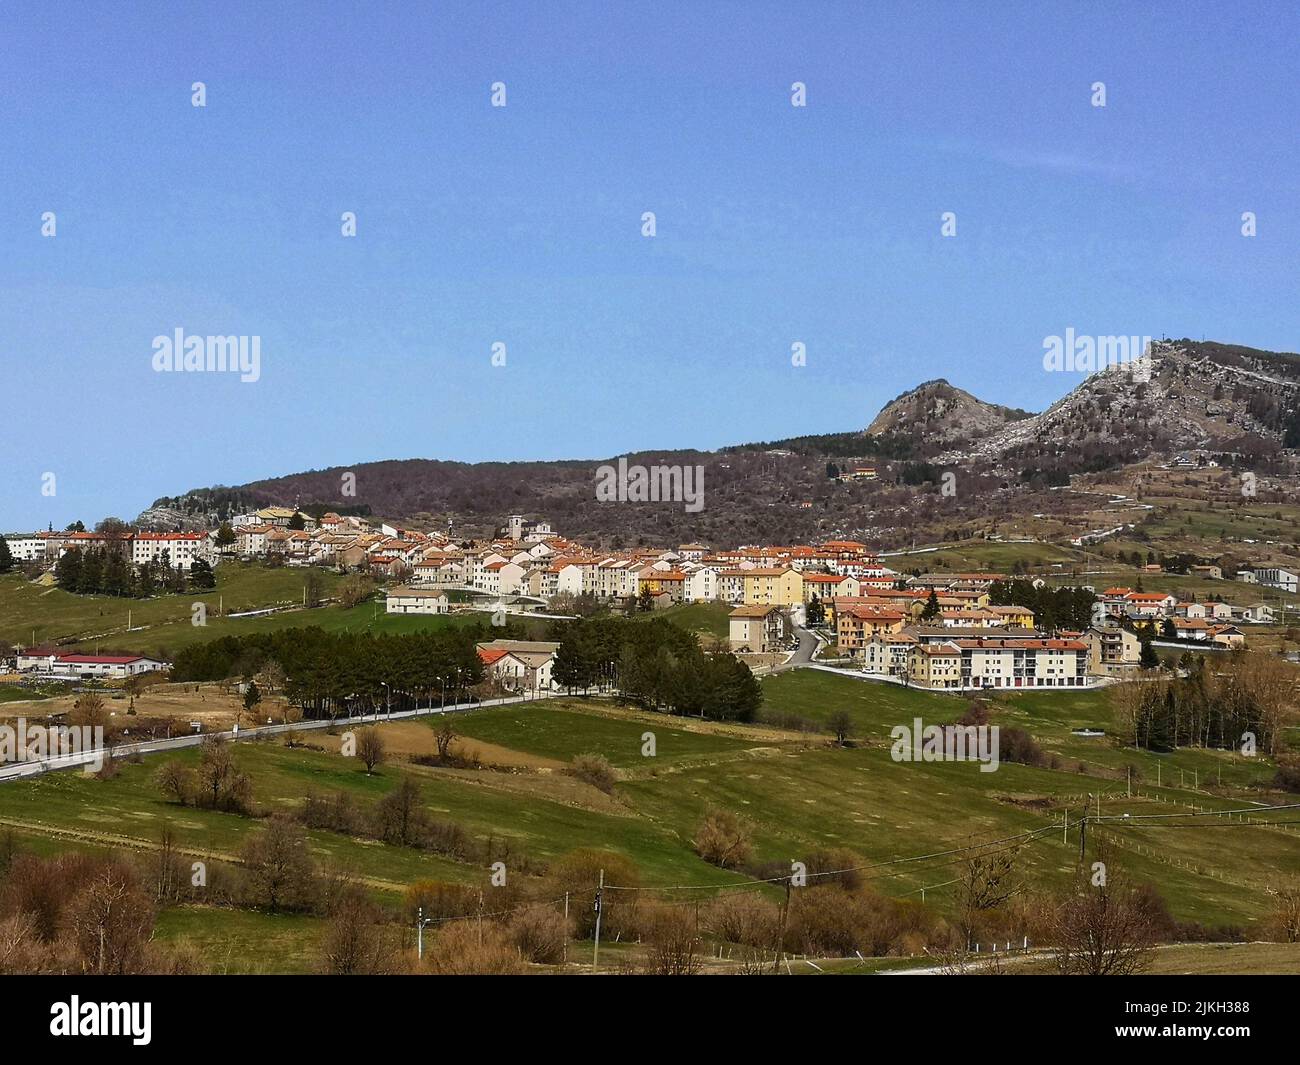 A beautiful shot of the buildings in the rural town of Capracotta in Molise, Italy Stock Photo